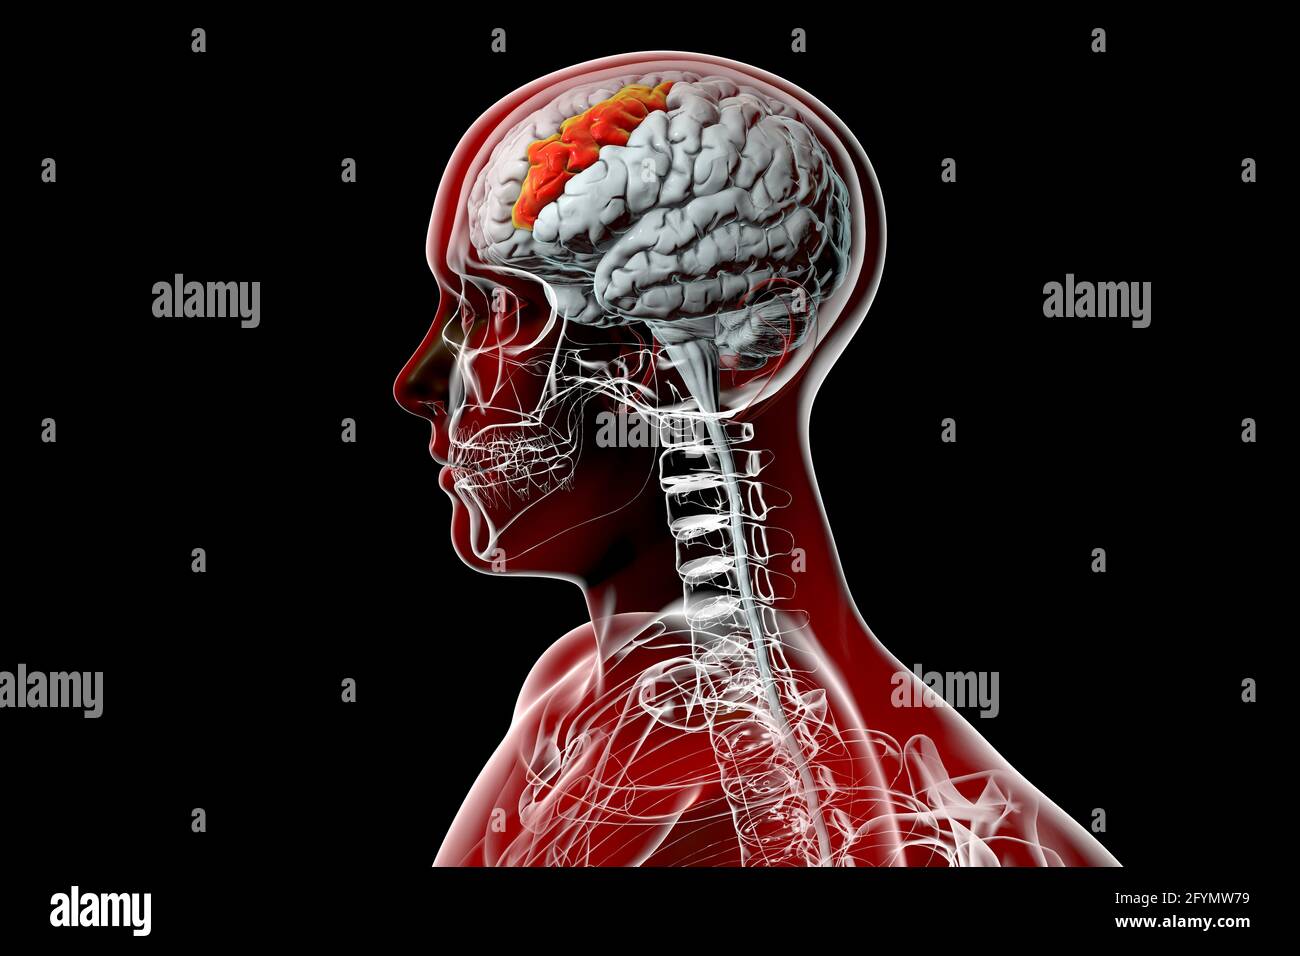 Brain with highlighted middle frontal gyrus, illustration Stock Photo